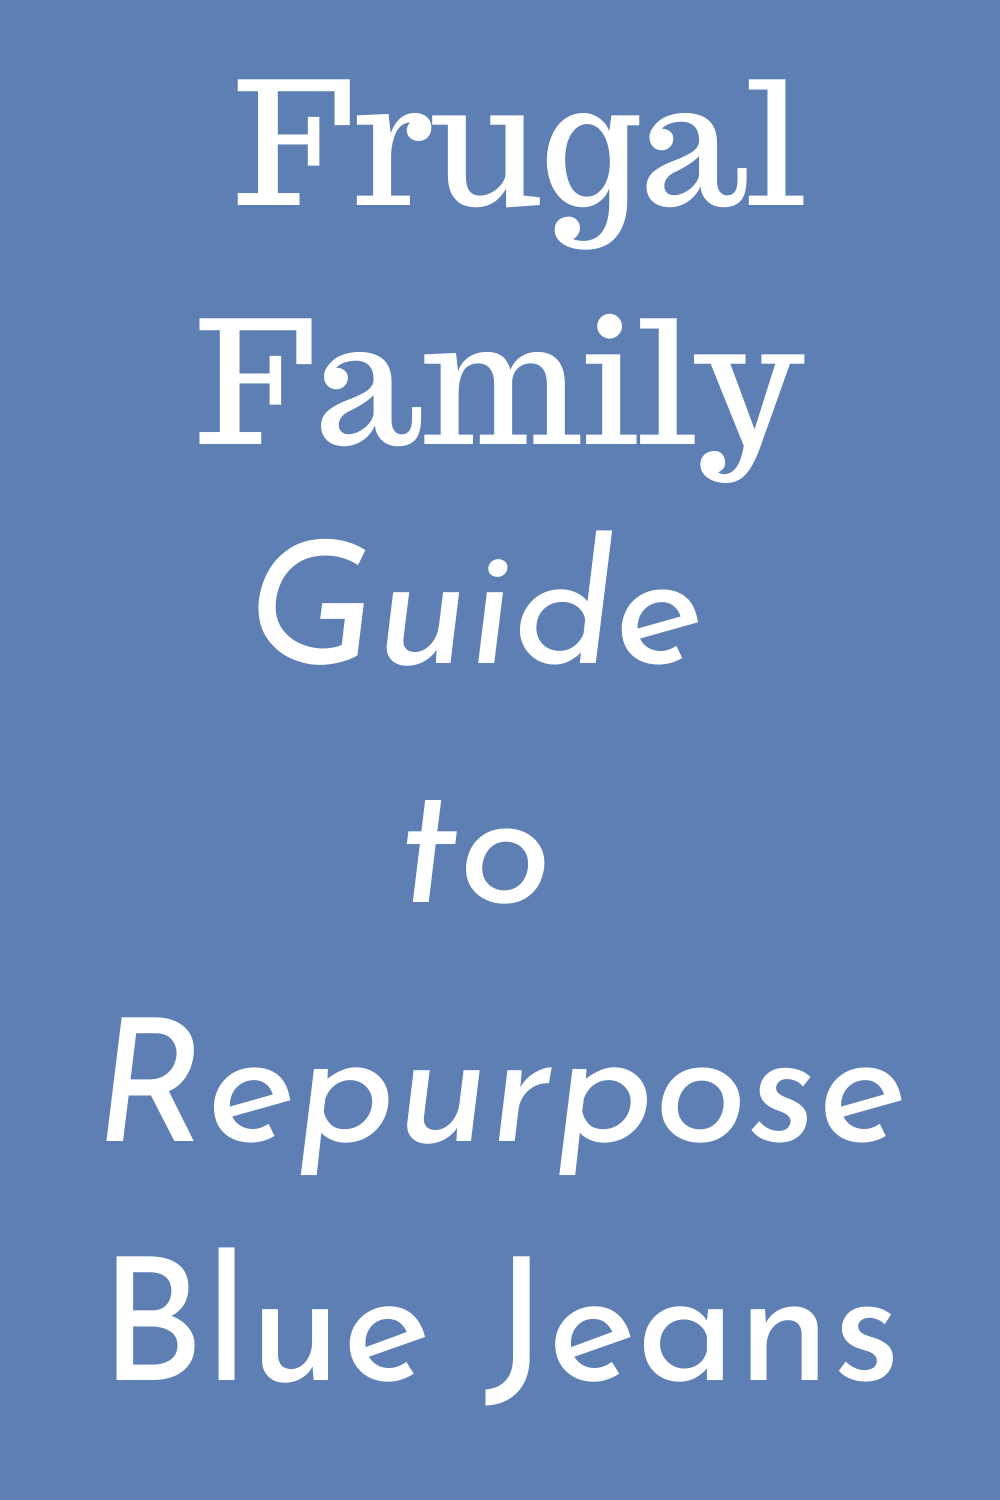 Frugal Family Guide to Repurpose Blue Jeans